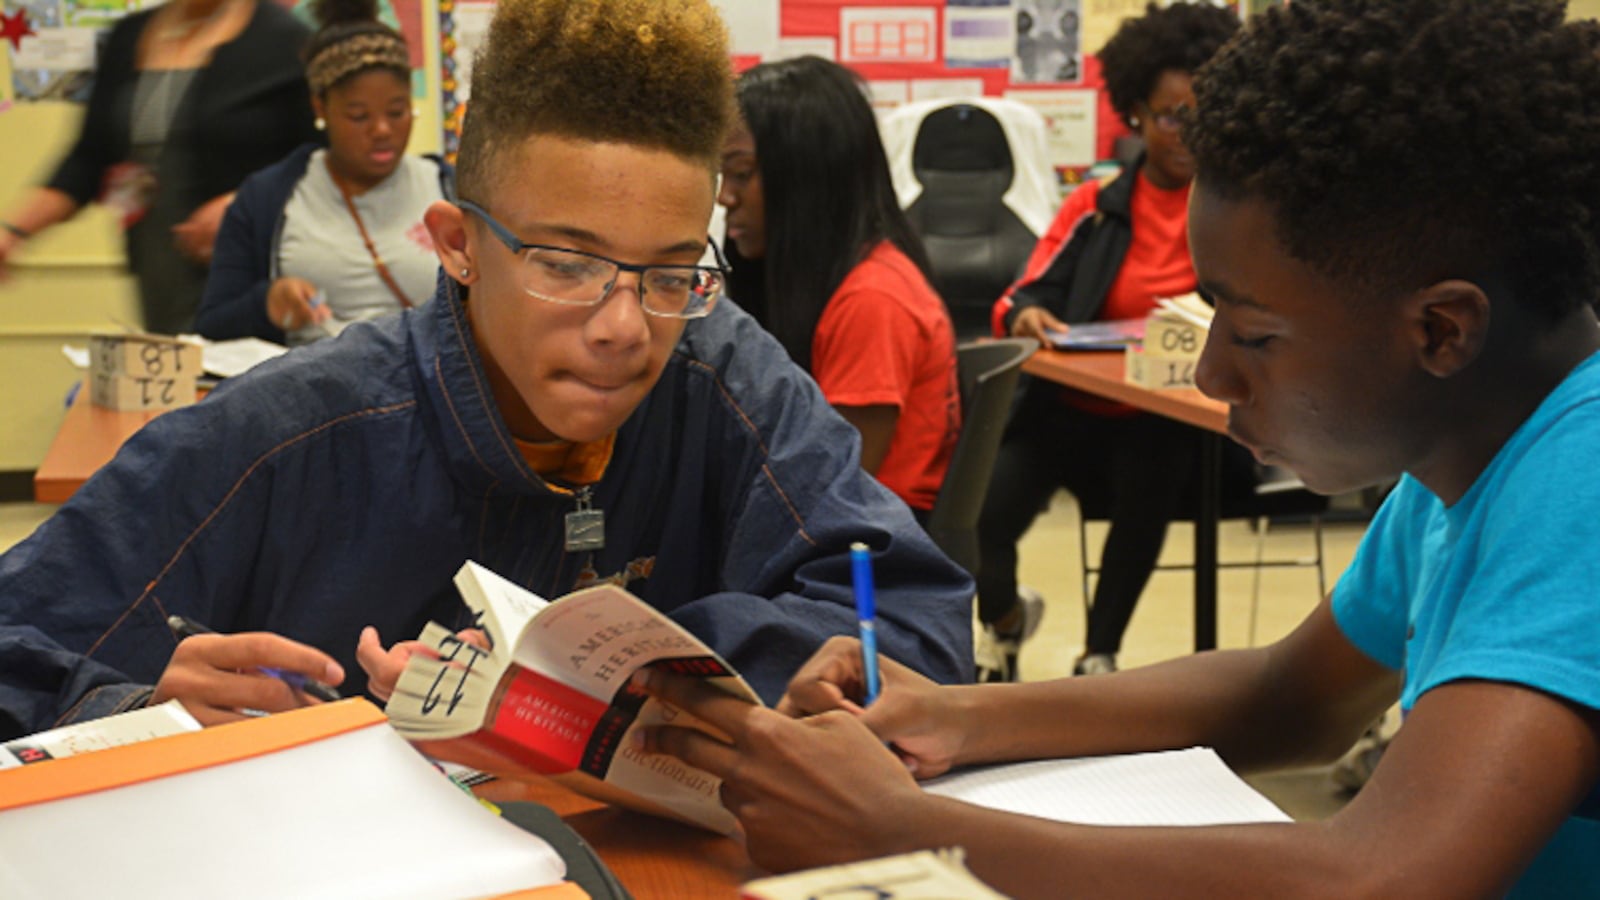 Students study at Memphis' Middle College High School, where Principal Docia Generette-Walker earned honors as Tennessee's principal of the year.